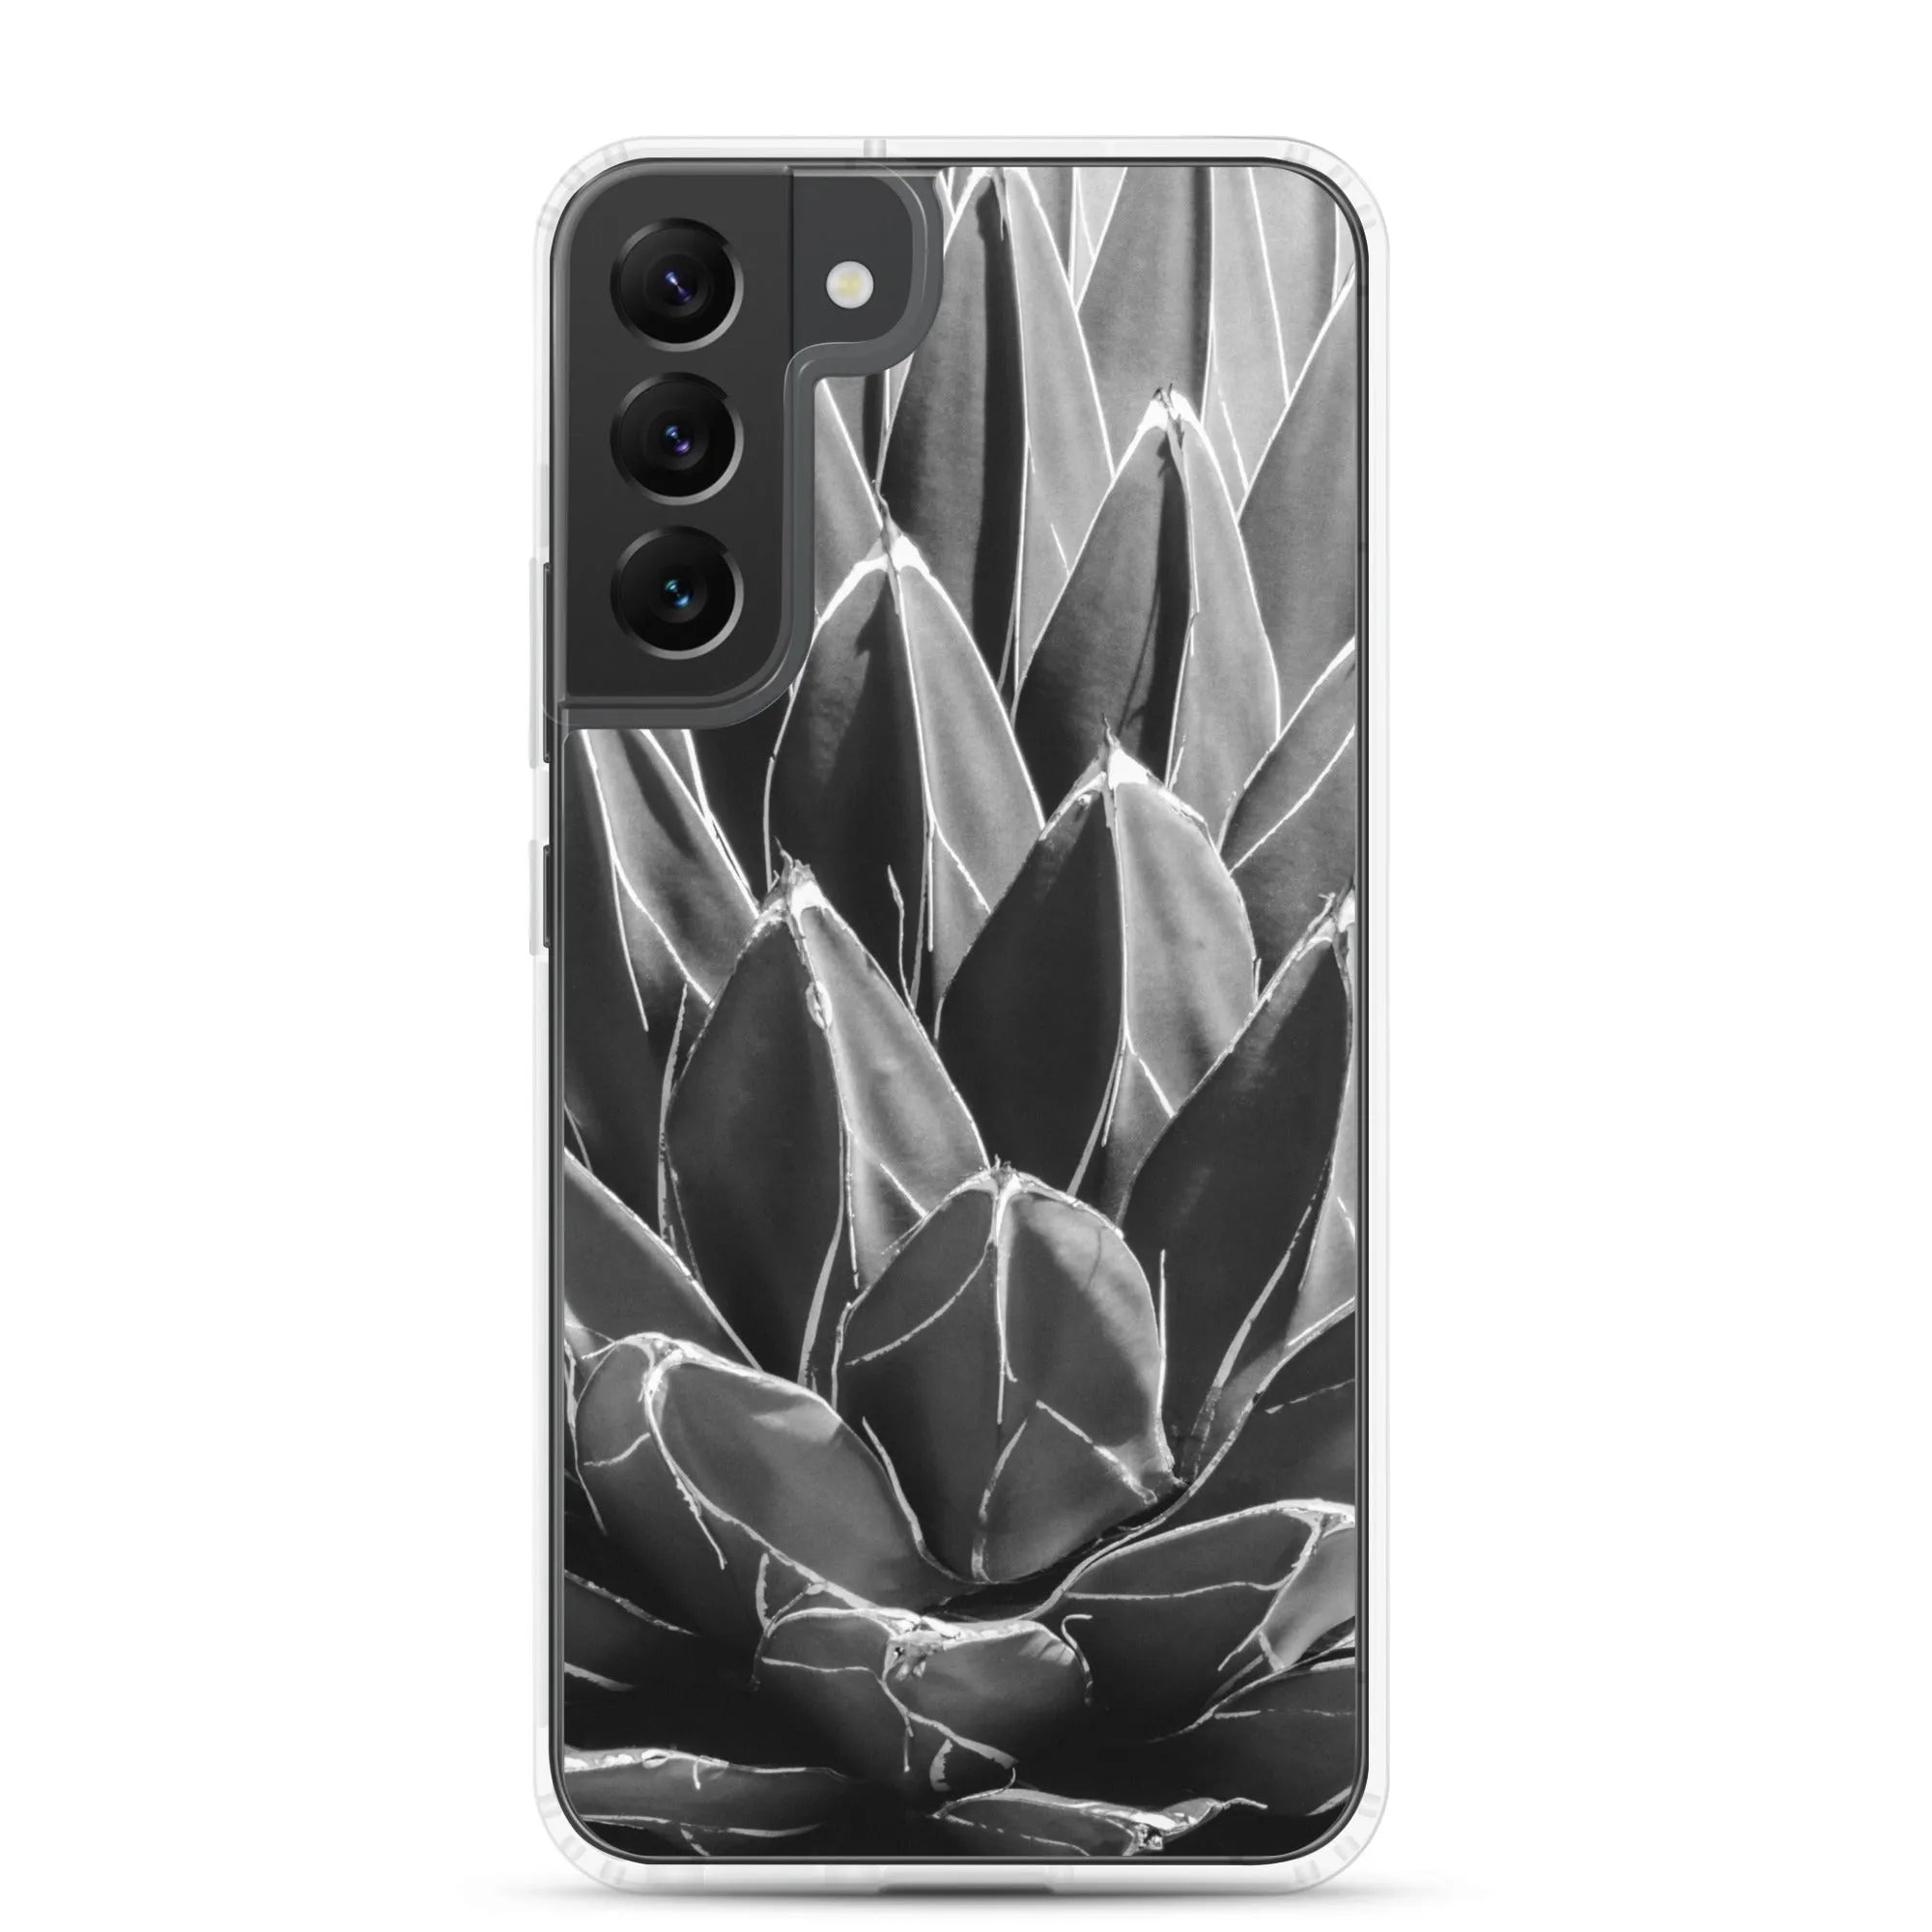 Decked Out Samsung Galaxy Case - Black And White - Samsung Galaxy S22 Plus - Mobile Phone Cases - Aesthetic Art